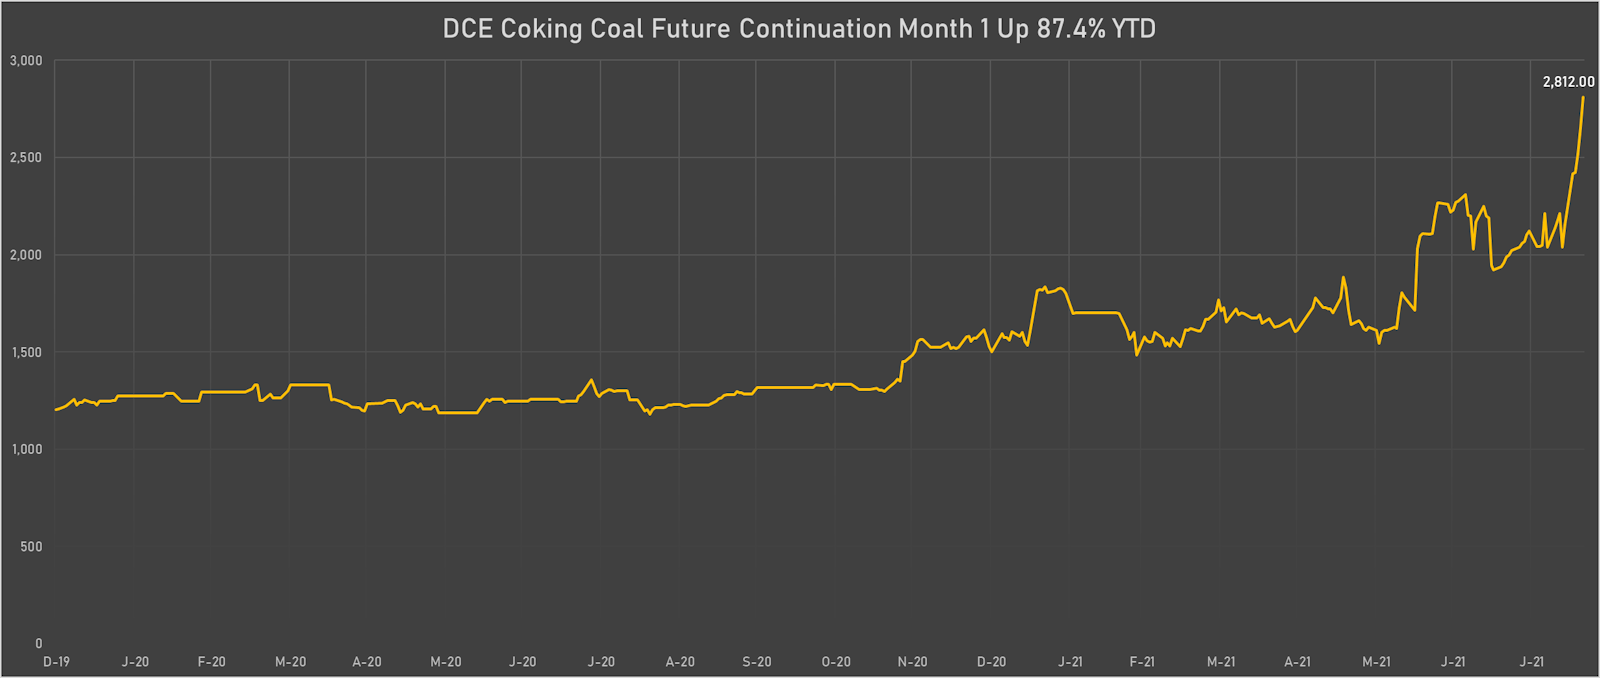 Coking coal rose over 30% this week in China | Sources: ϕpost, Refinitiv data